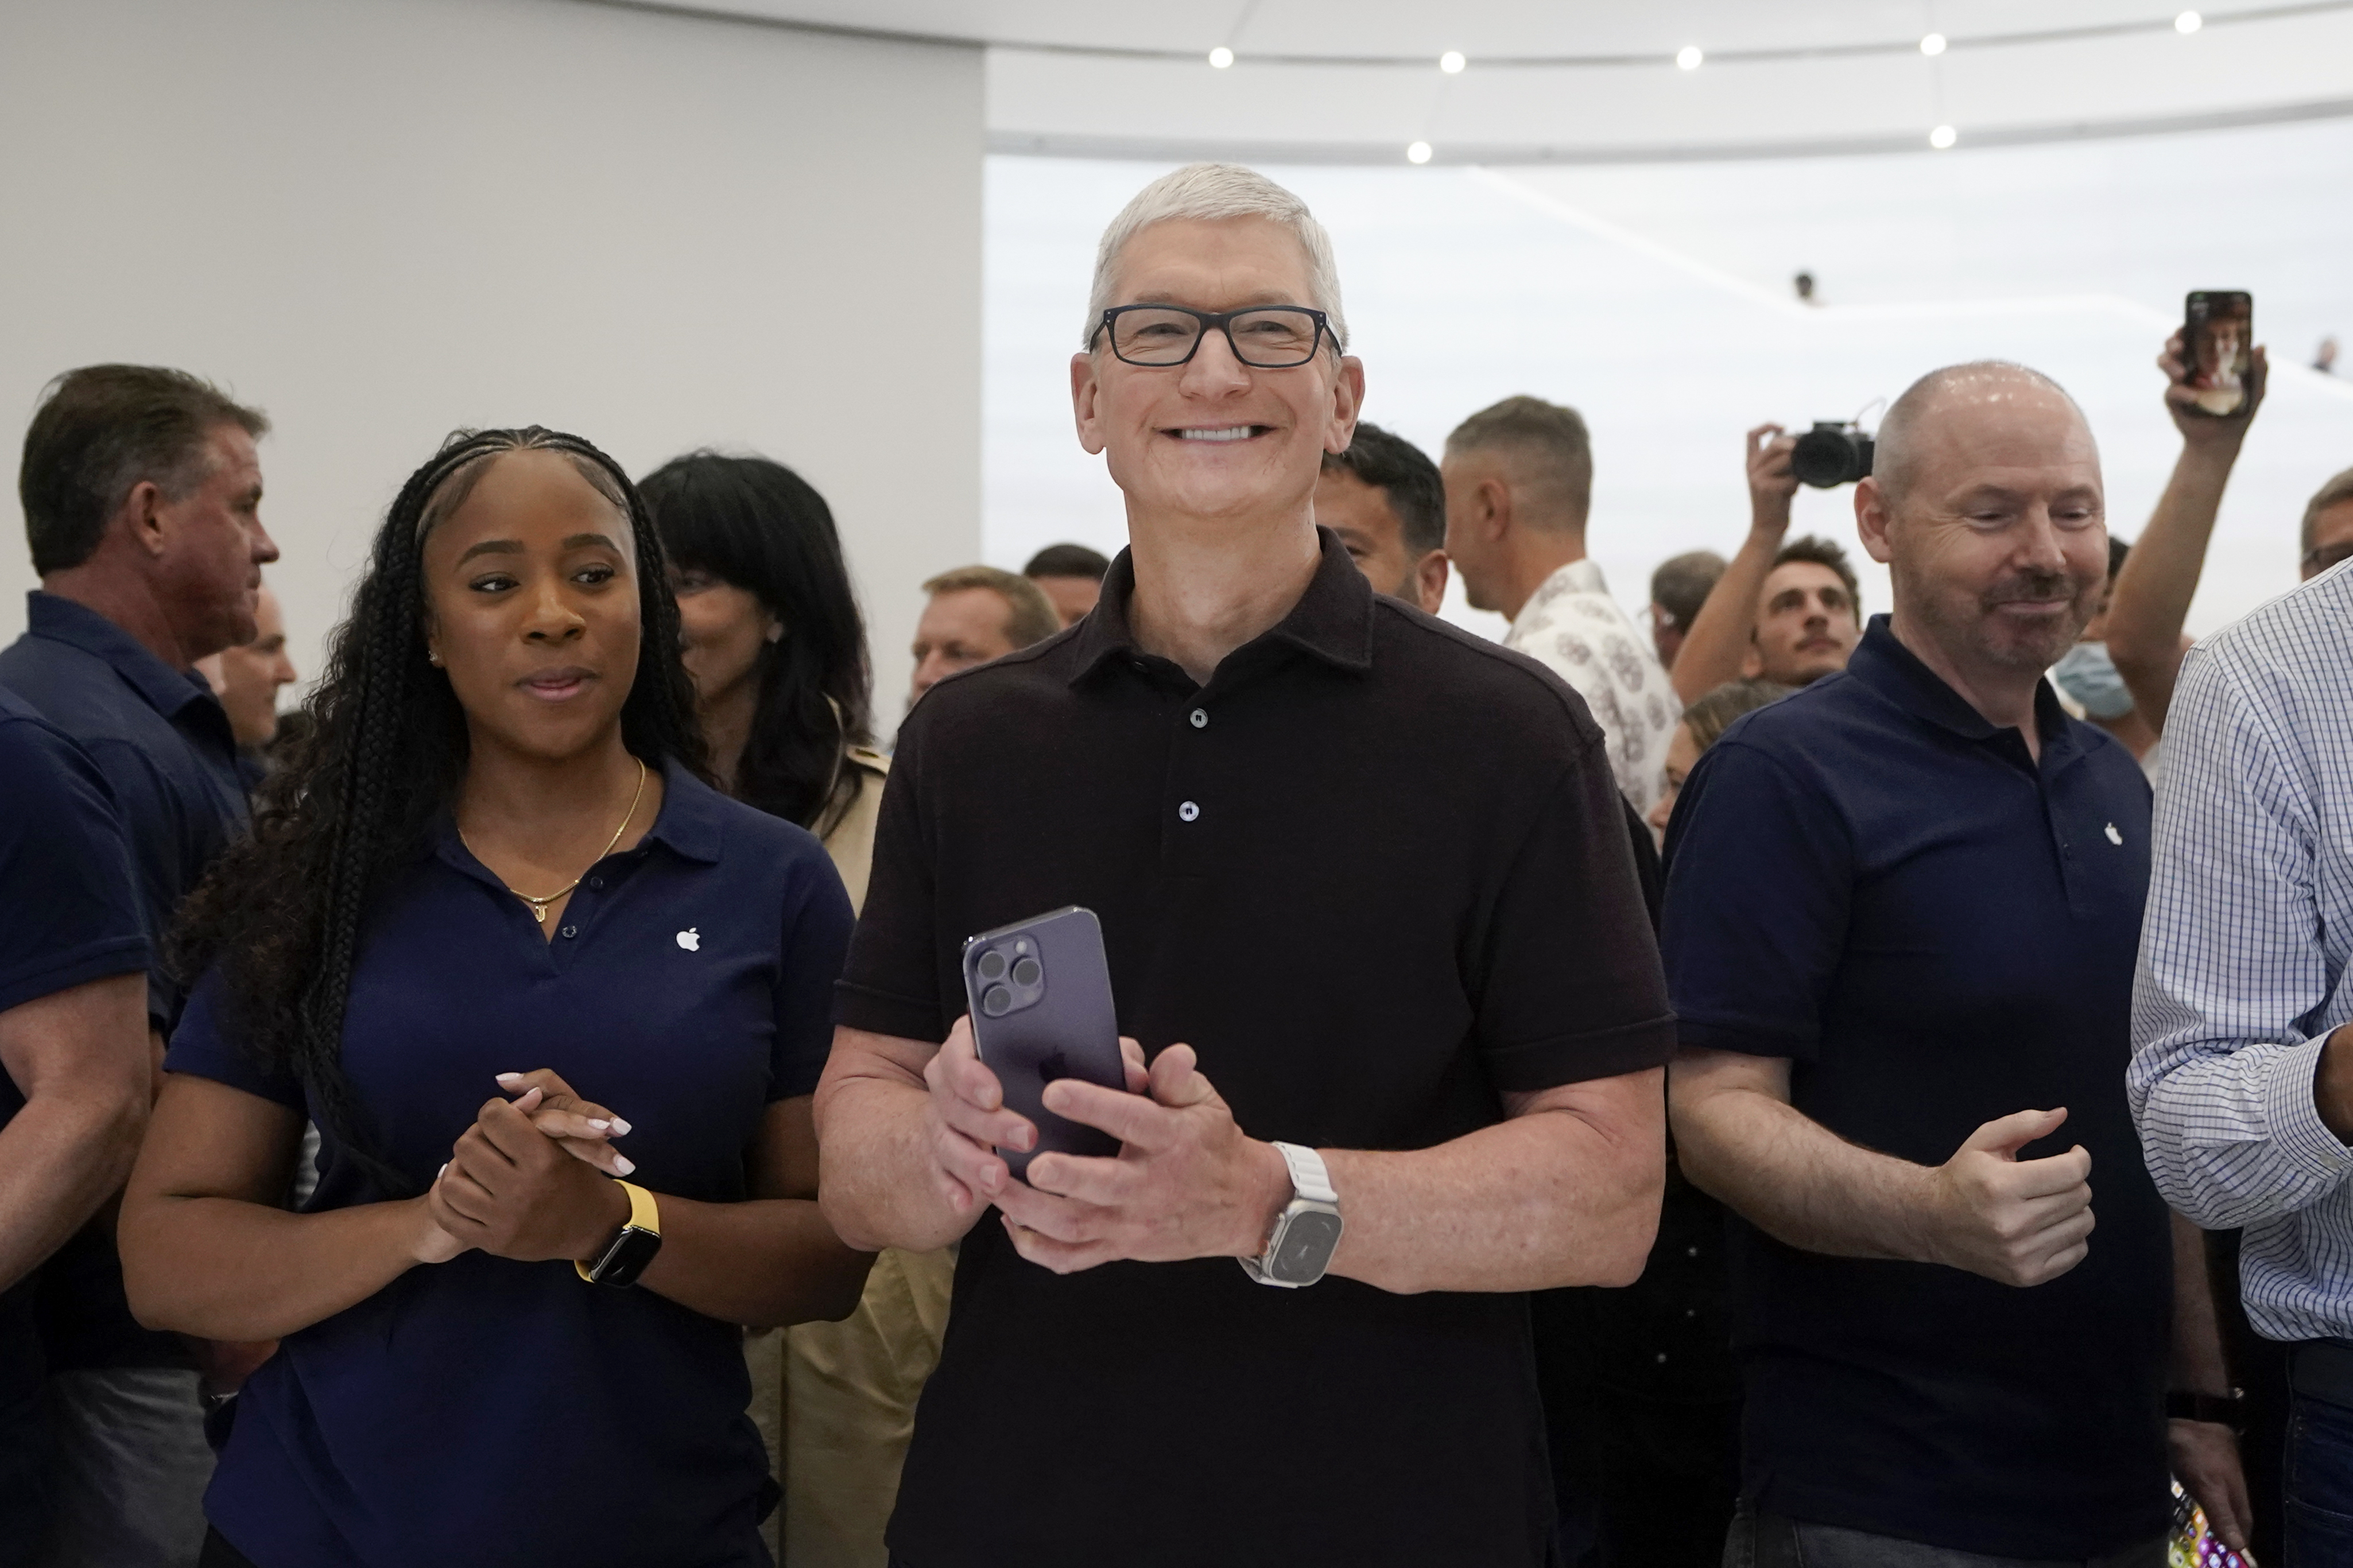 Apple CEO Tim Cook smiling and holding an iPhone.